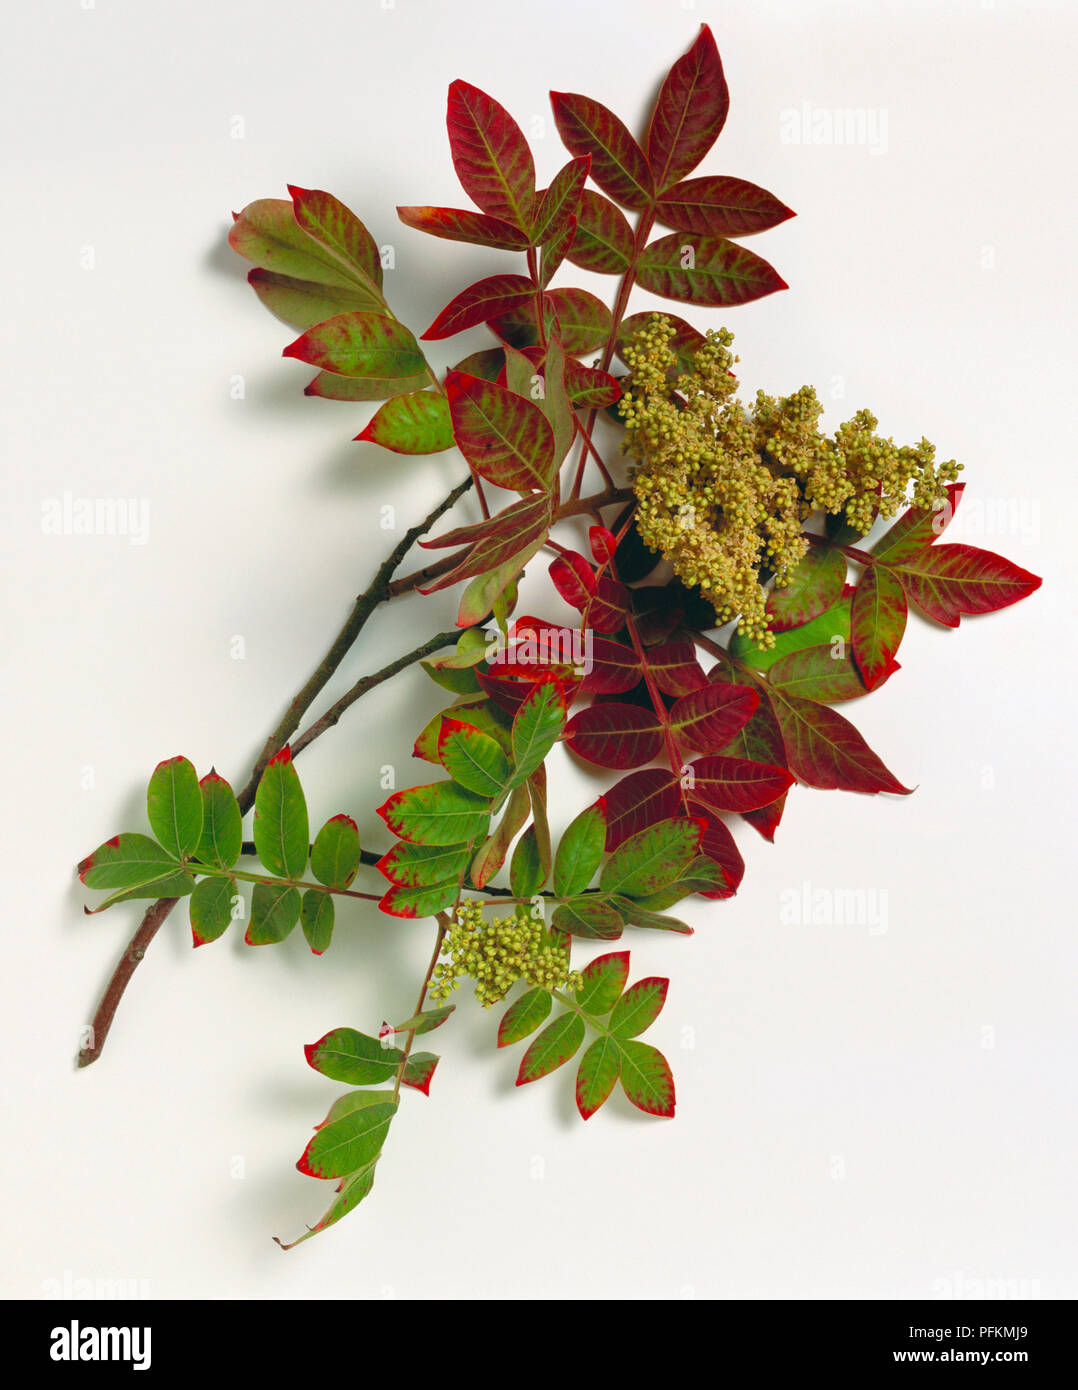 Rhus copallina (Dwarf Sumach), small red and green leaves and clusters of tiny green flowers on stems Stock Photo